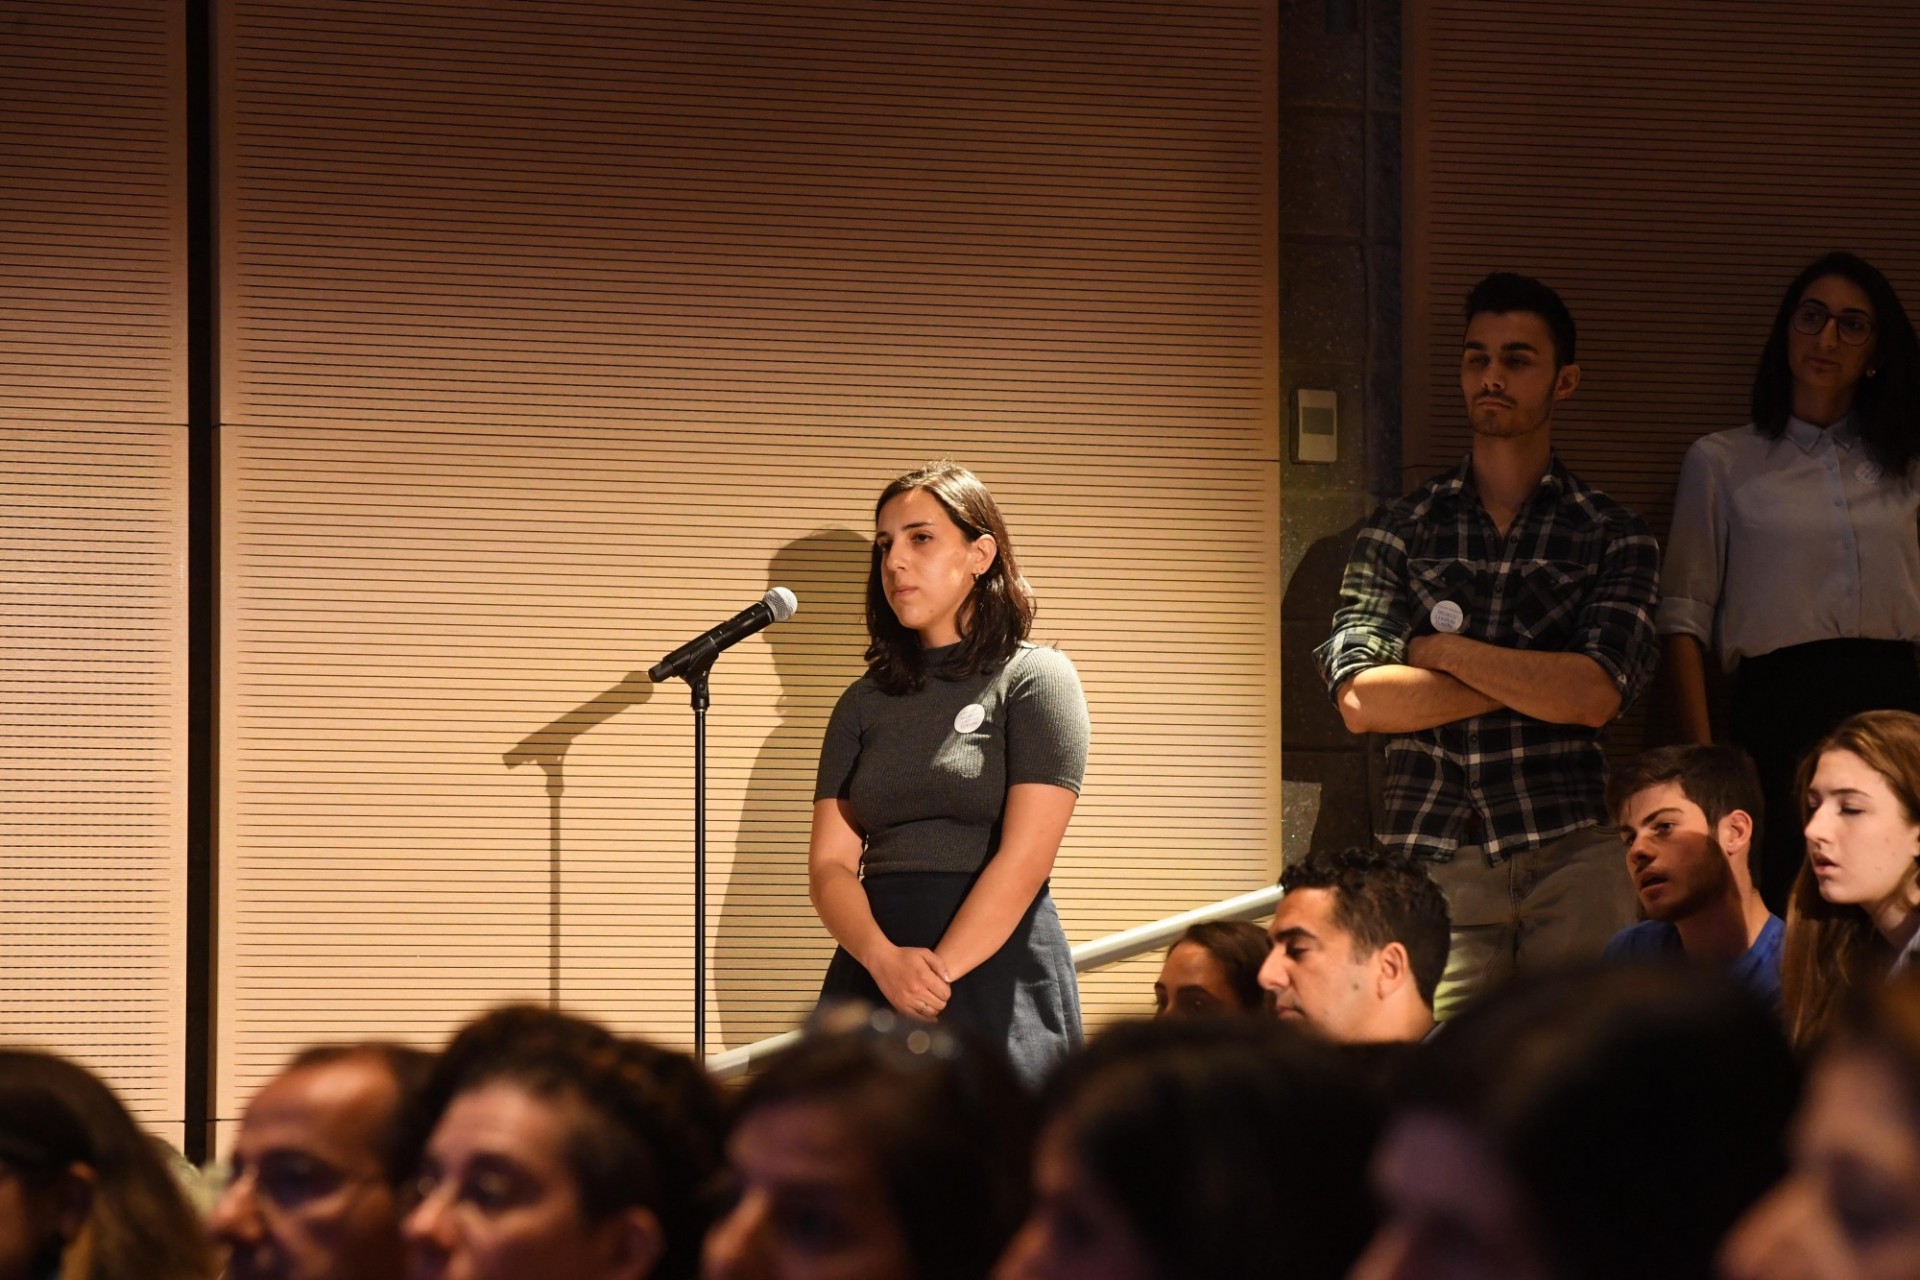 Columbia University students line up to ask Prime Minister Nikol Pashinyan of Armenia a question during the question and answer session.